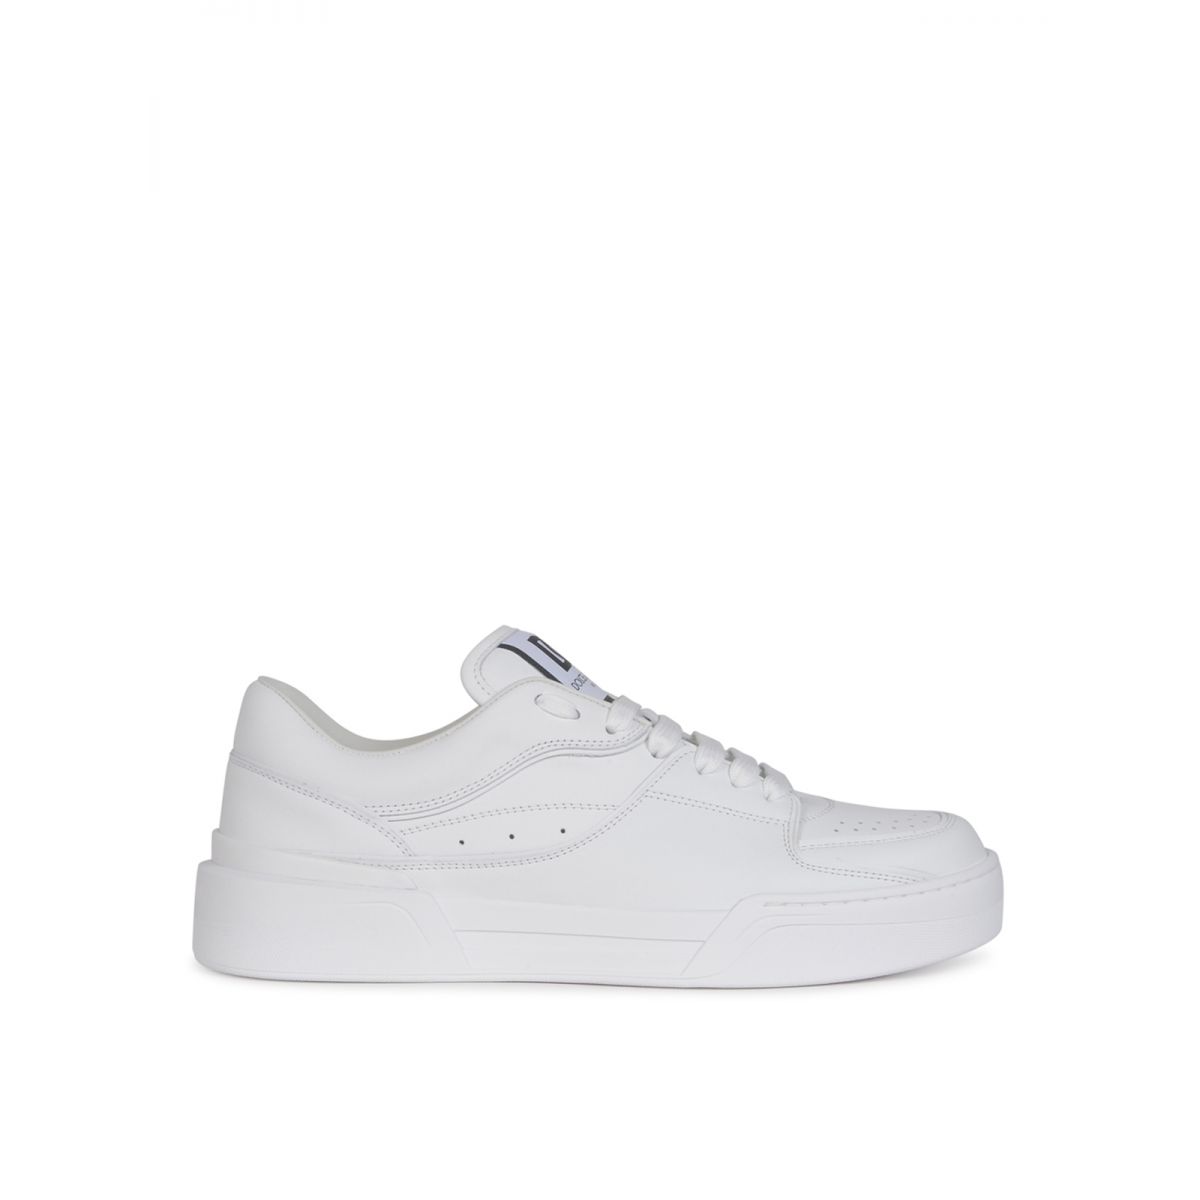 DOLCE & GABBANA - Roma low-top sneakers